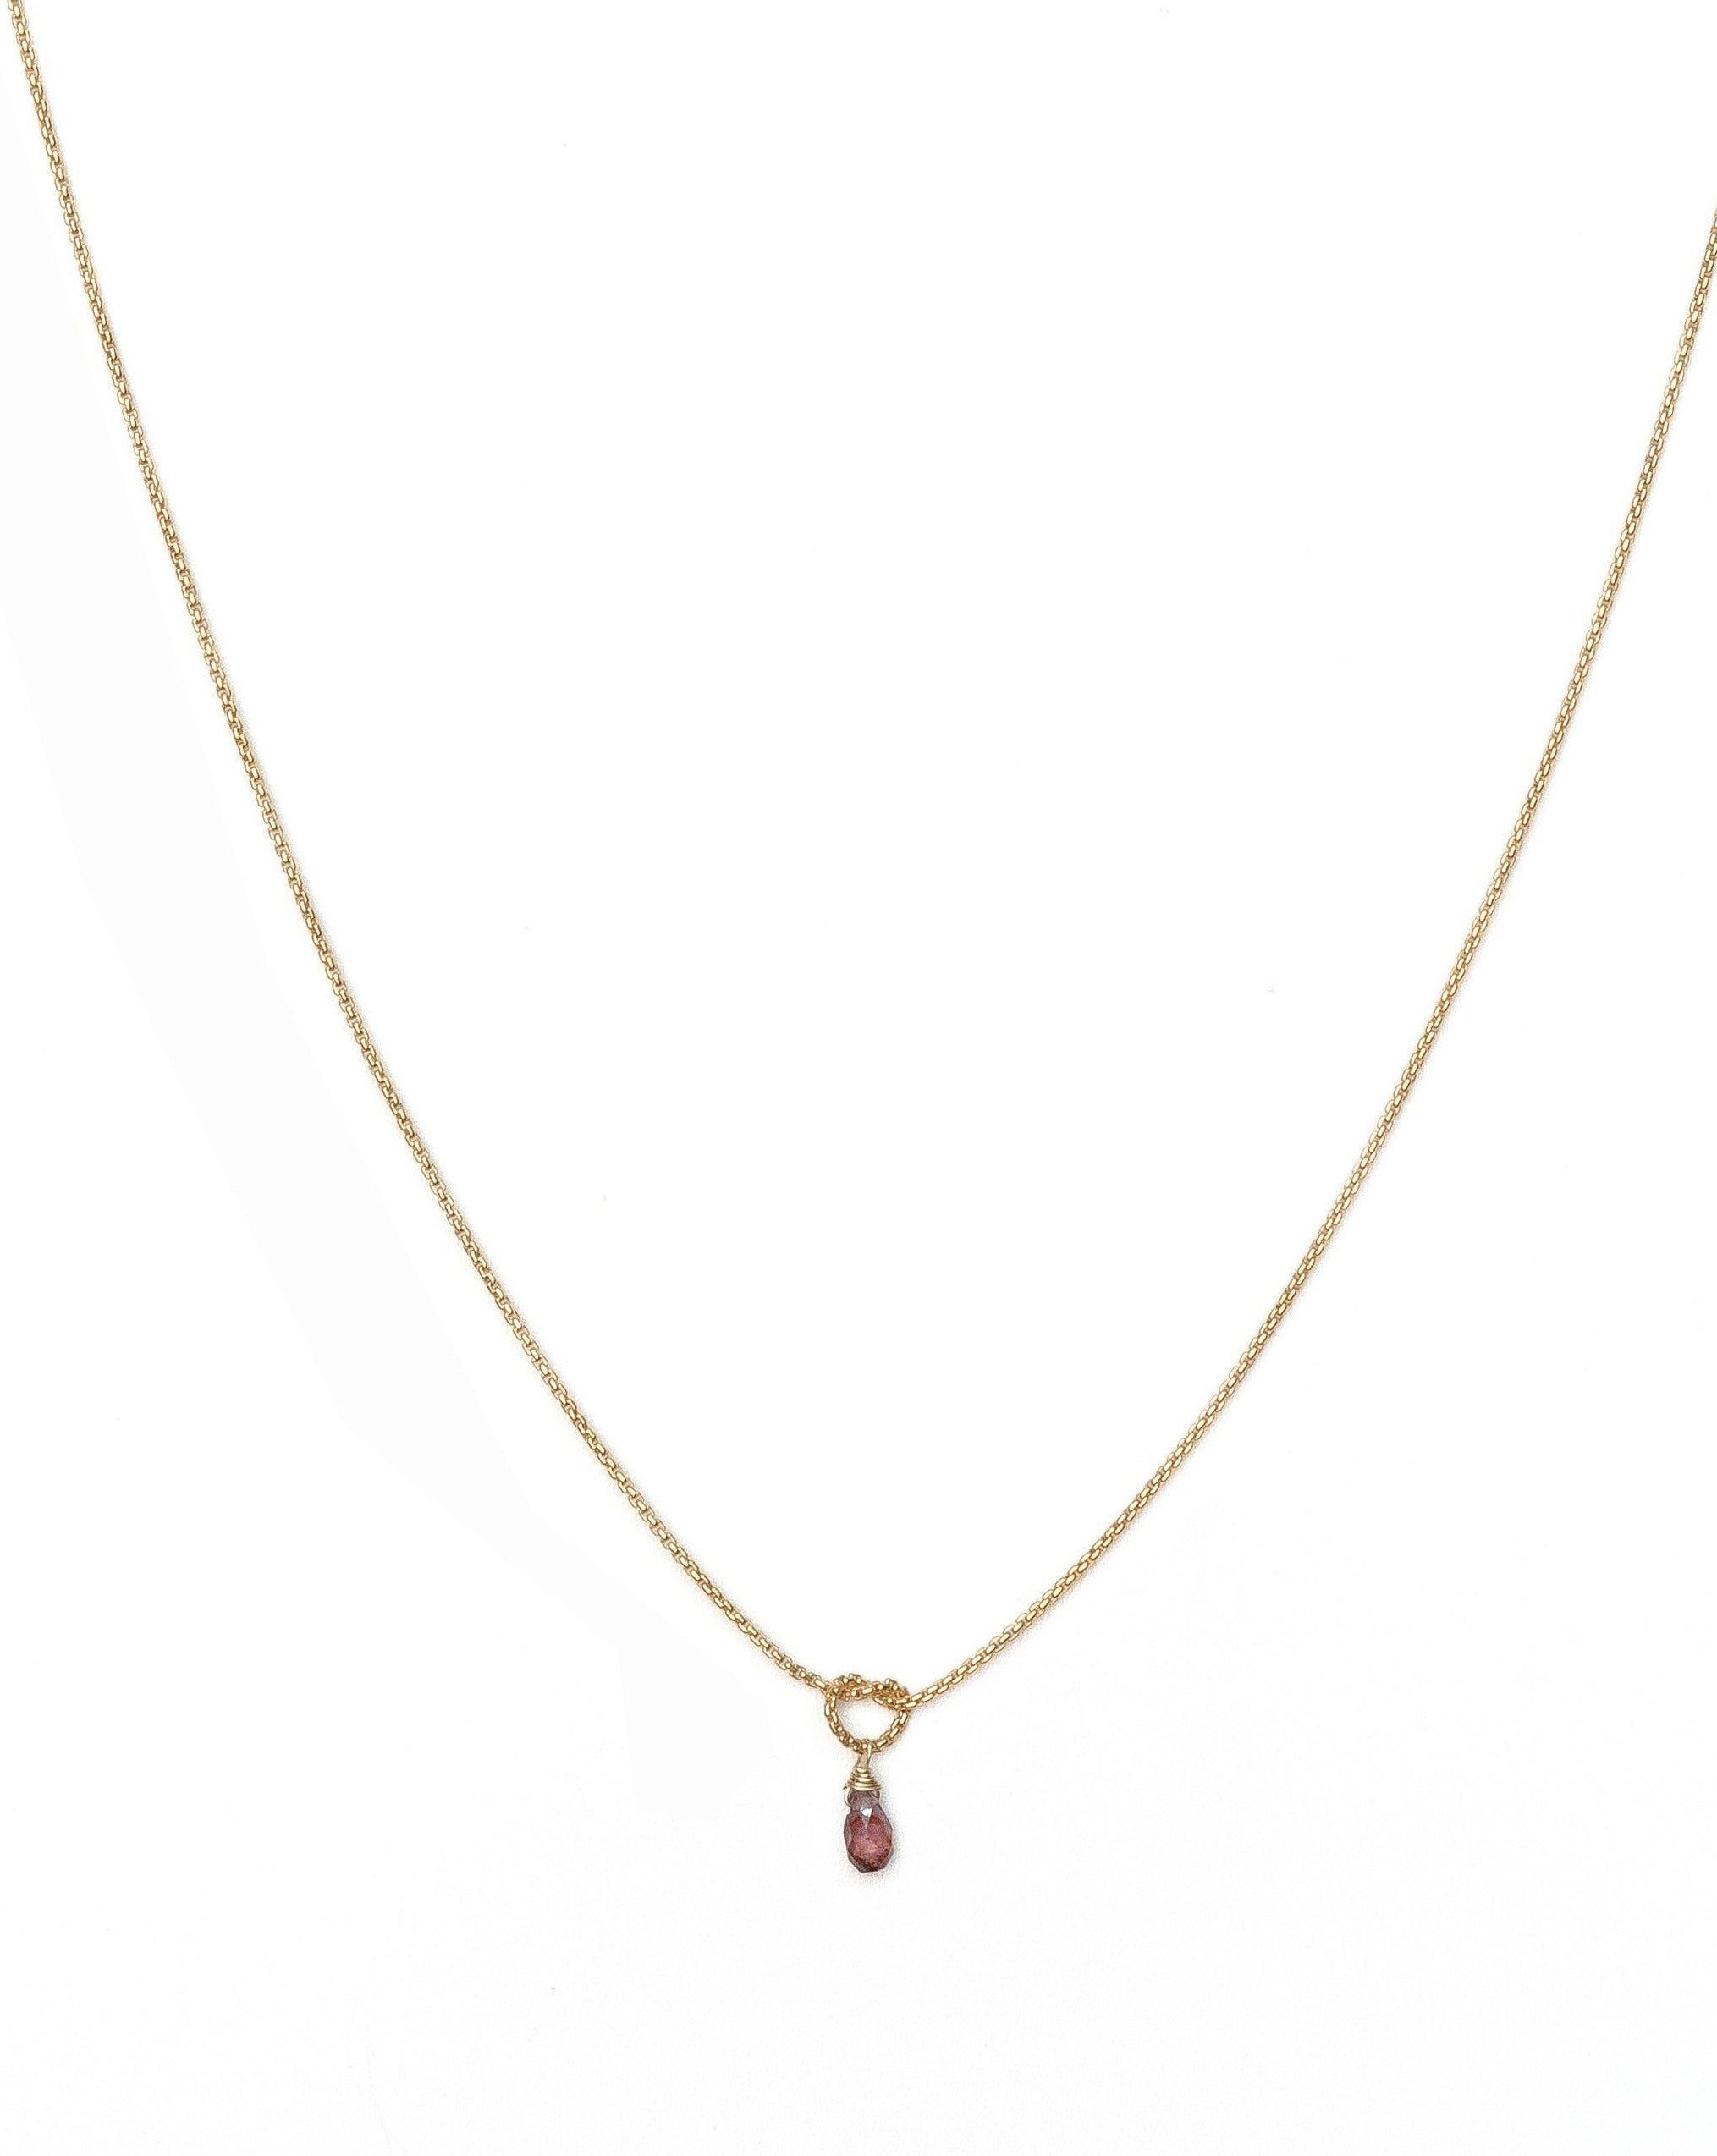 Love Knot Necklace by KOZAKH. A 16 to 18 inch adjustable length necklace, crafted in 14K Gold Filled, featuring a knot and a faceted Burgundy Sapphire droplet.